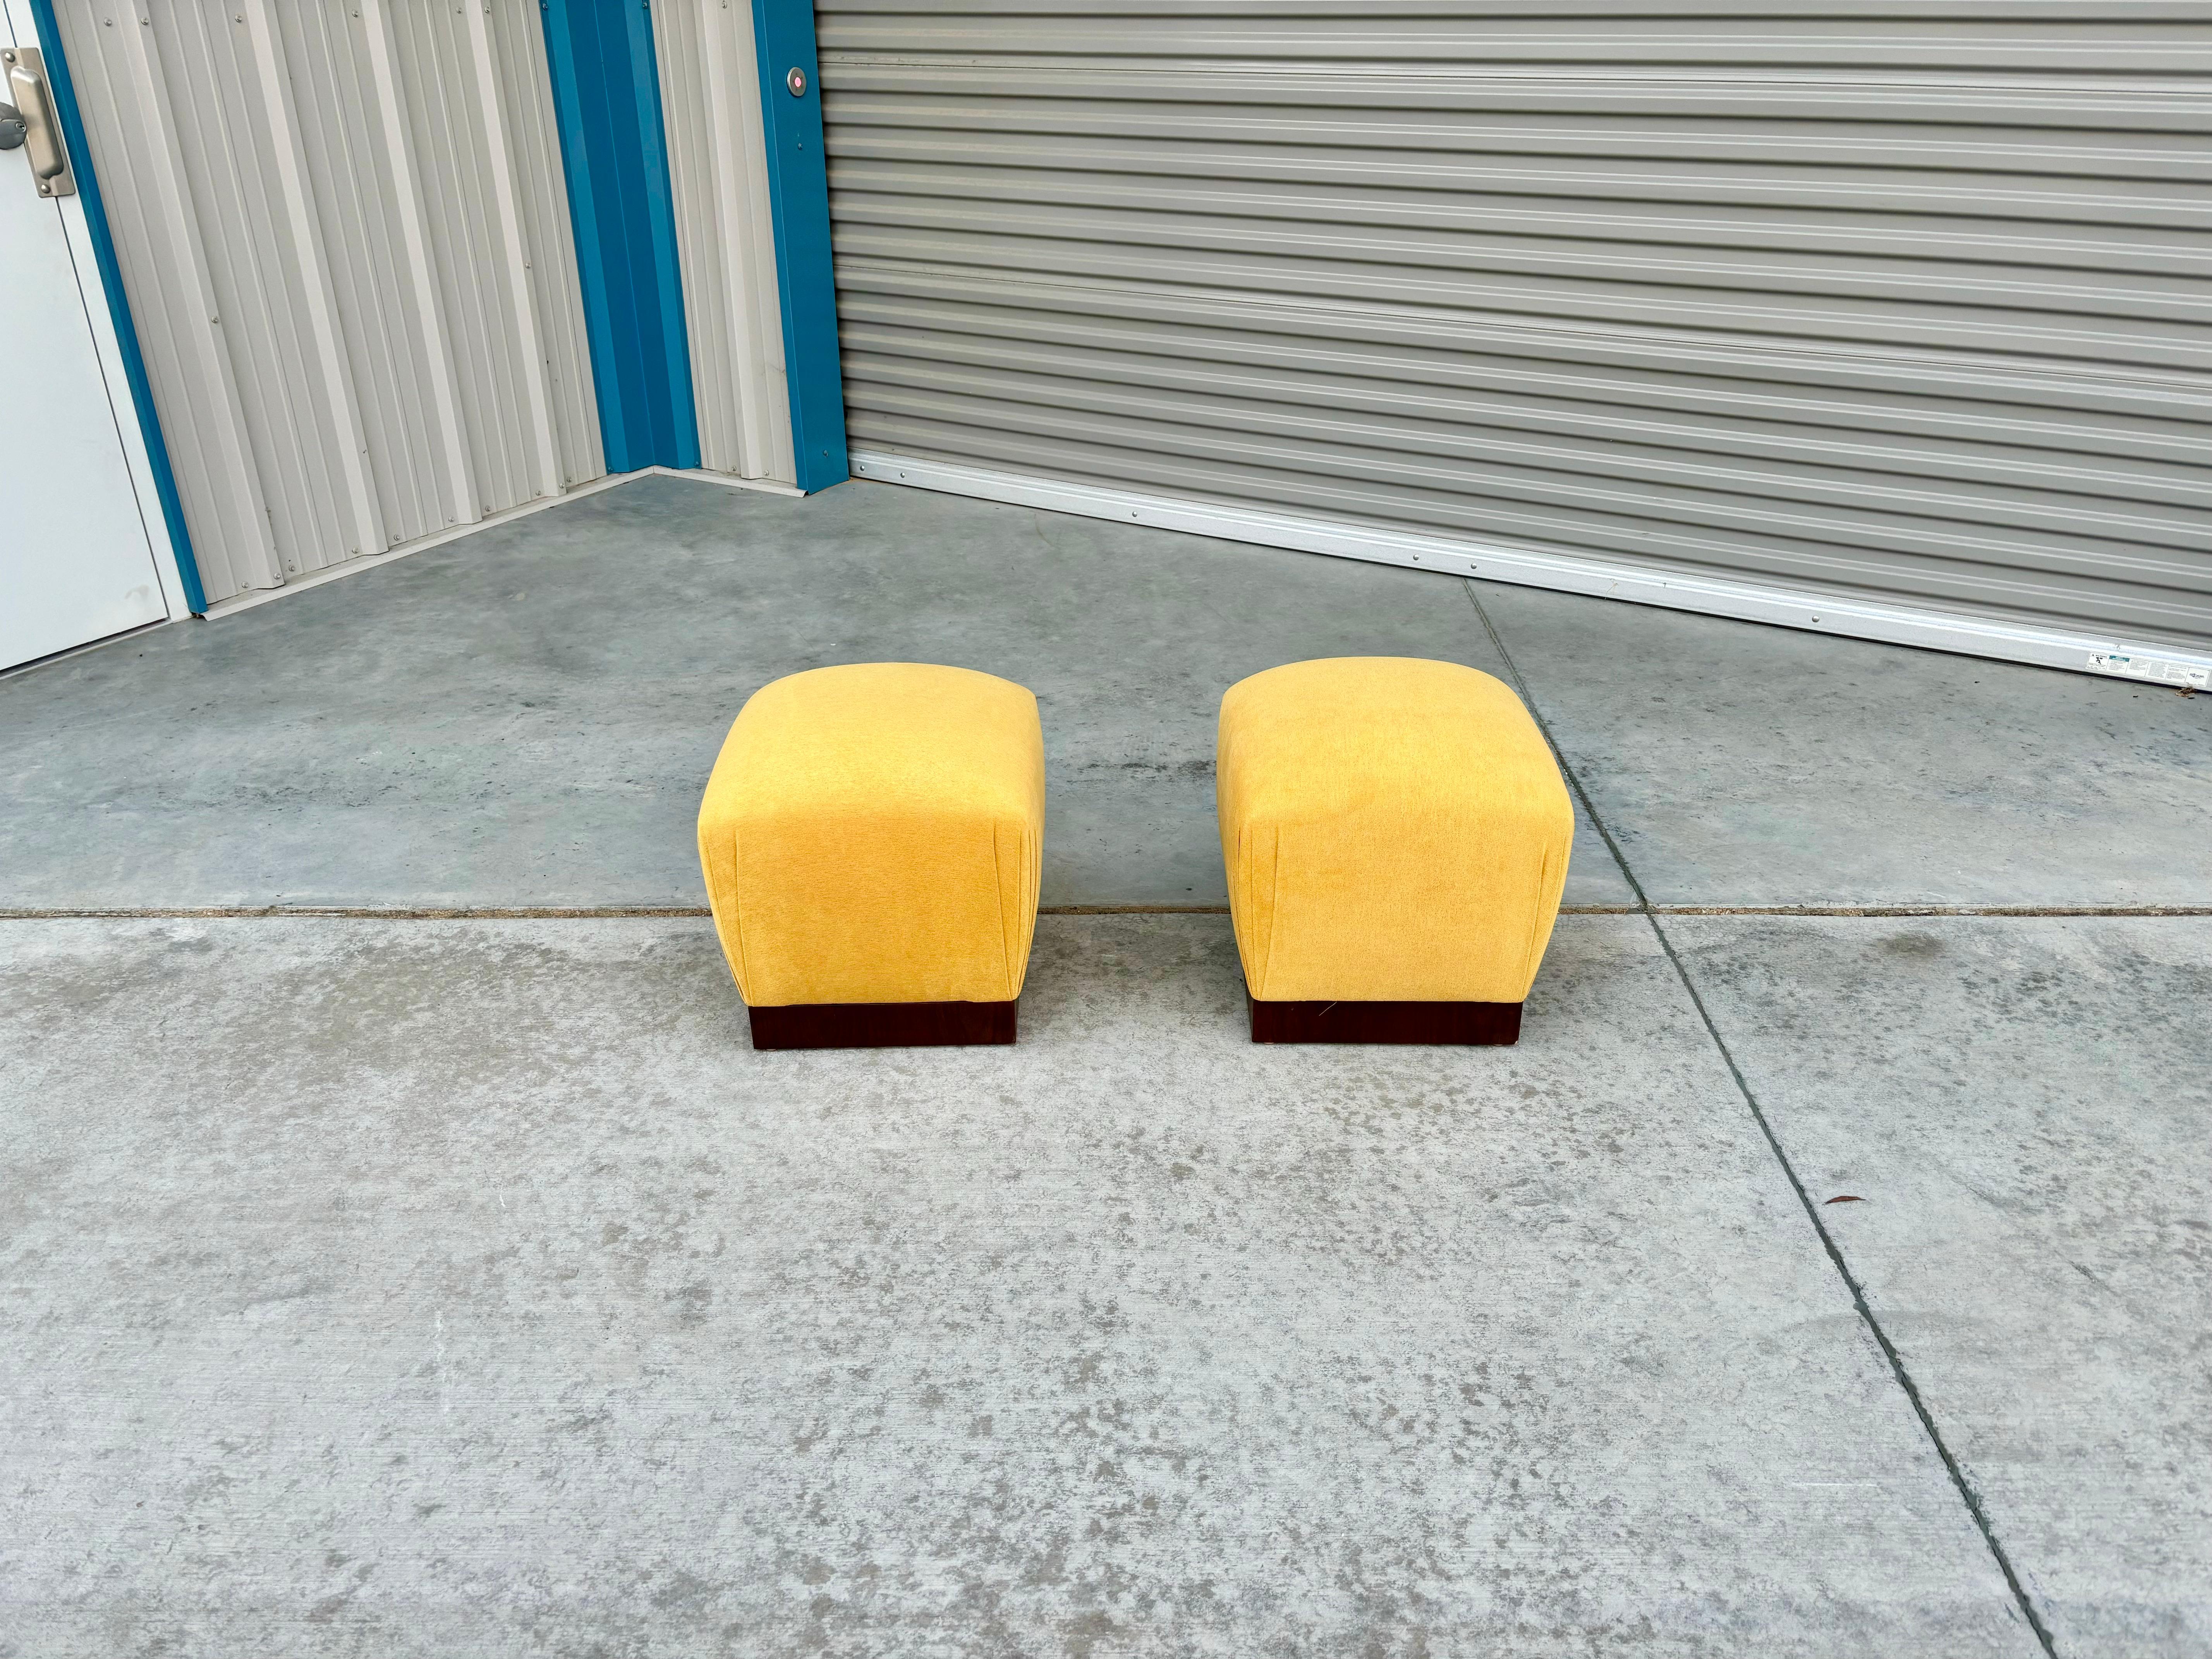 Pair of mid-century walnut ottoman designed and manufactured in the United States circa 1970s. These ottomans feature a sleek and sturdy walnut frame that perfectly complements the vibrant yellow upholstery. Whether you're looking to add a pop of